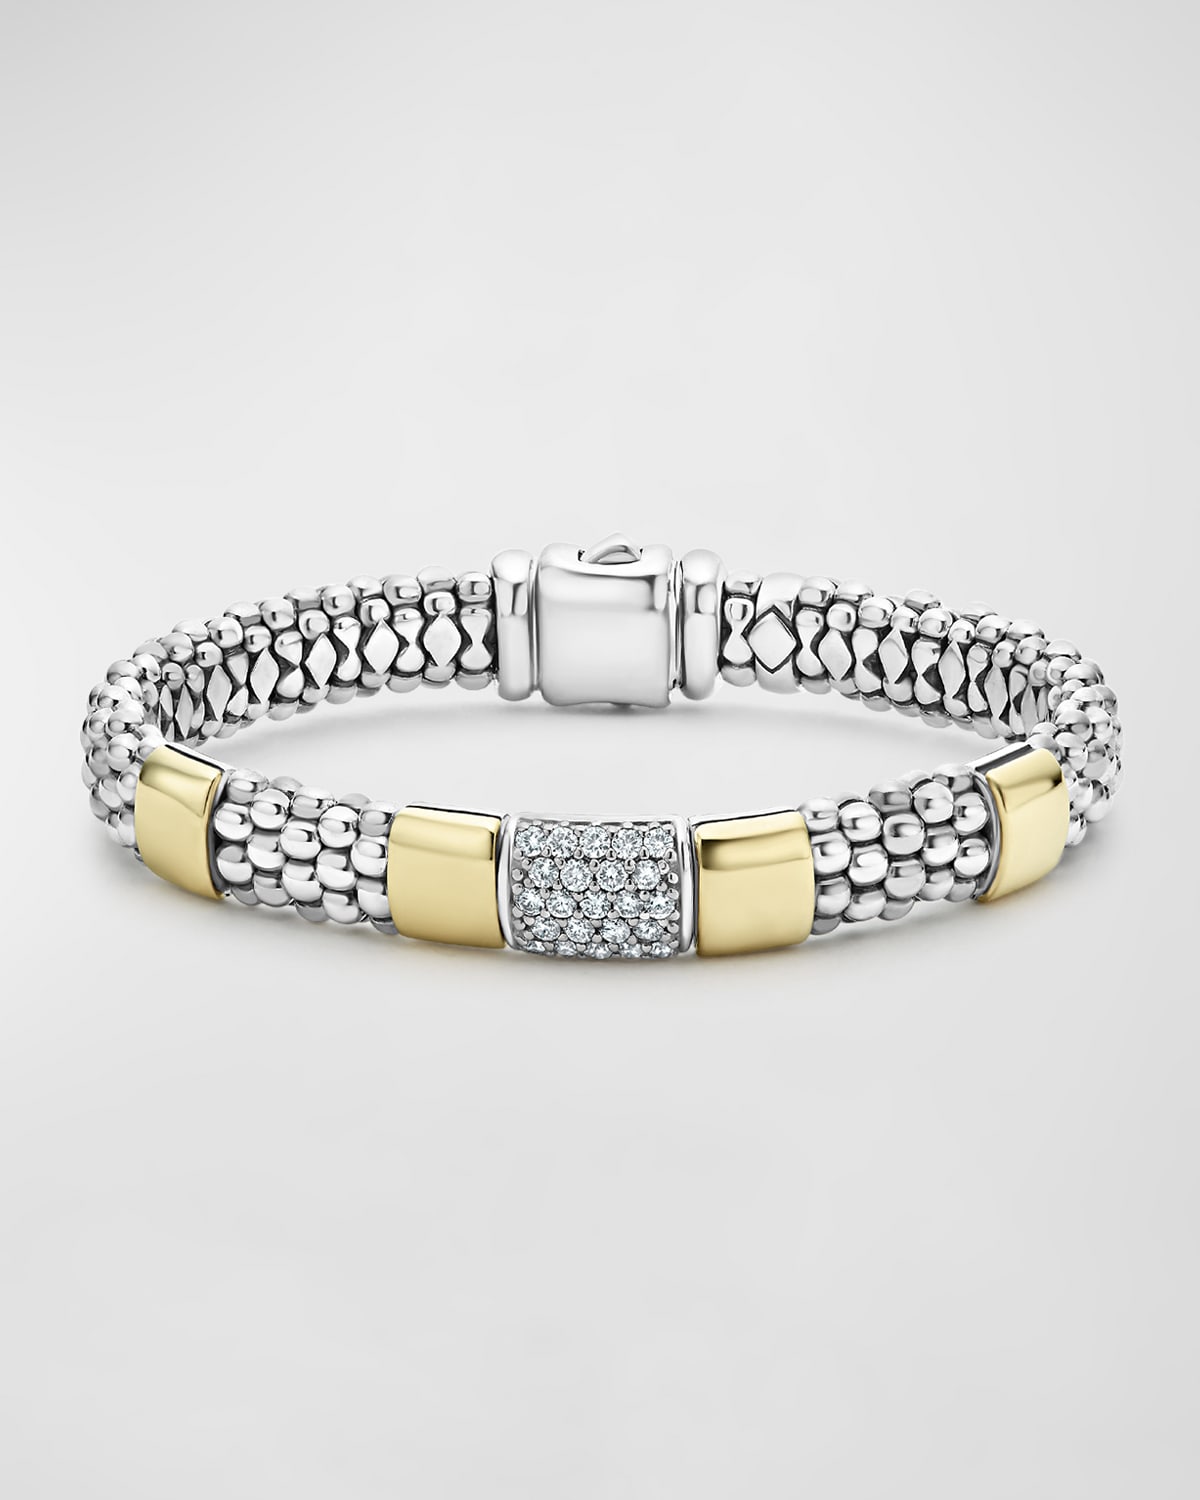 LAGOS DIAMOND AND SMOOTH STATION BRACELET IN 18K GOLD WITH STERLING SILVER CAVIAR BEADING